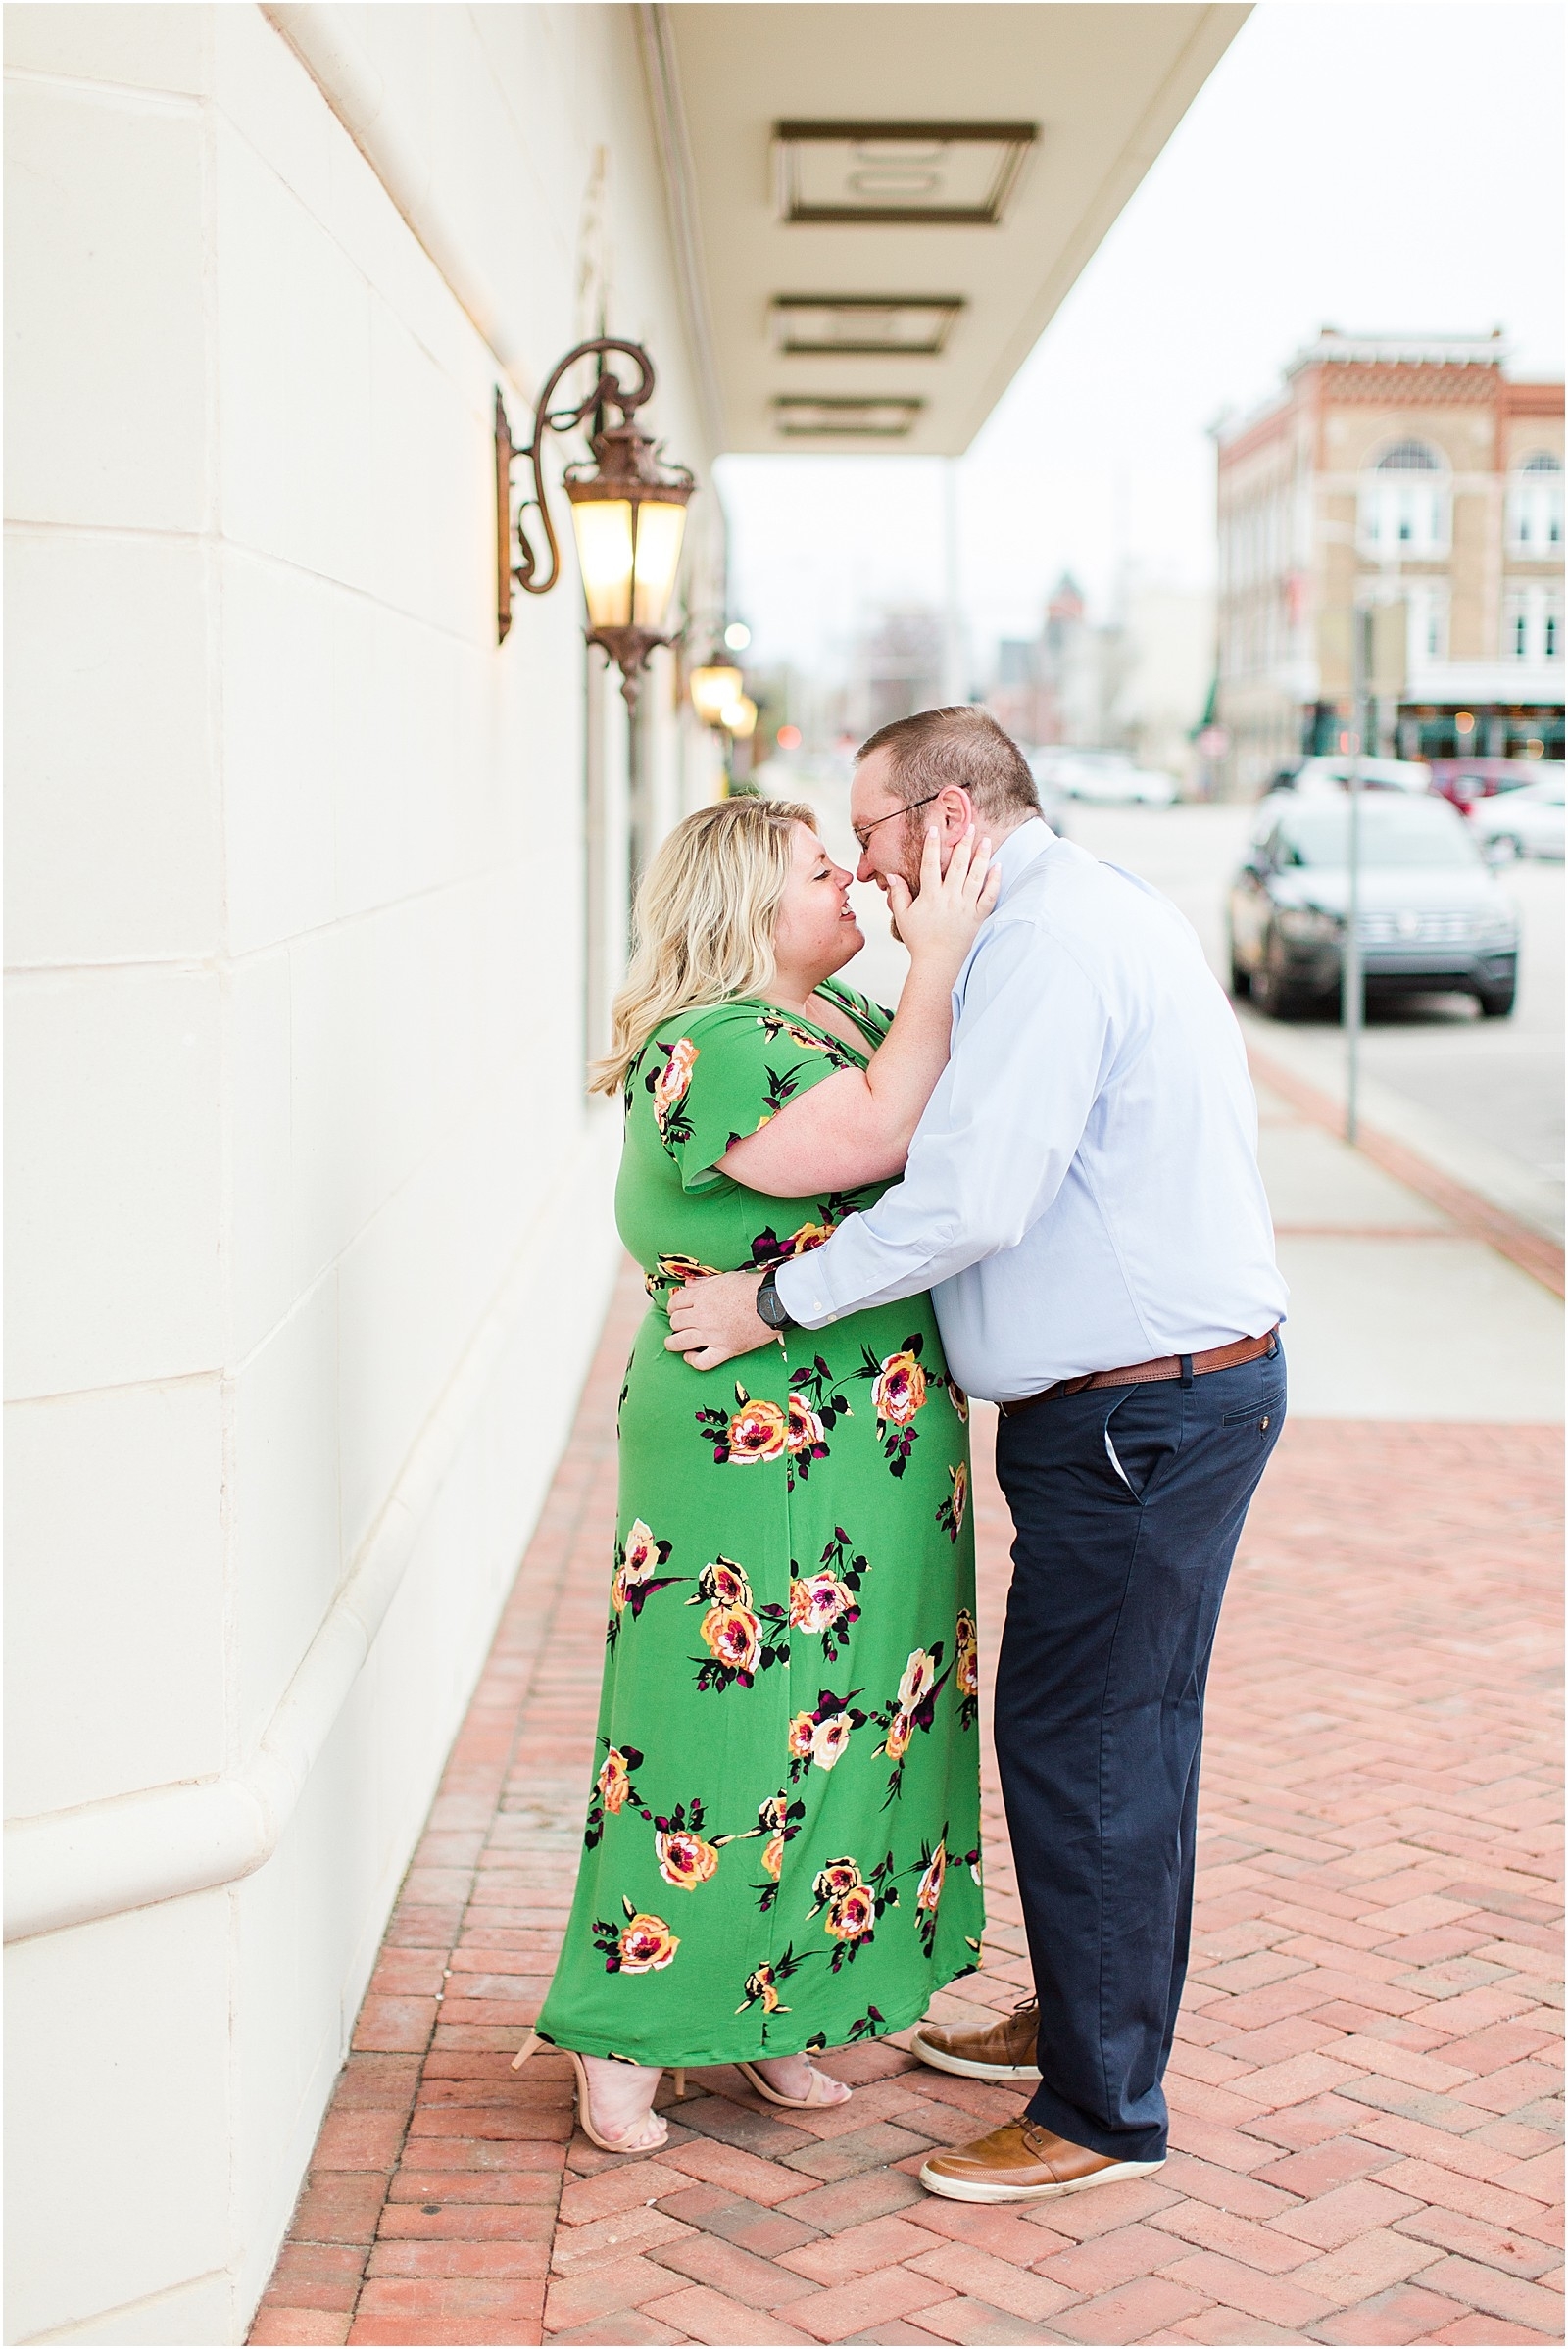 The Best of Engagement Sessions 2020 Recap0014.jpg